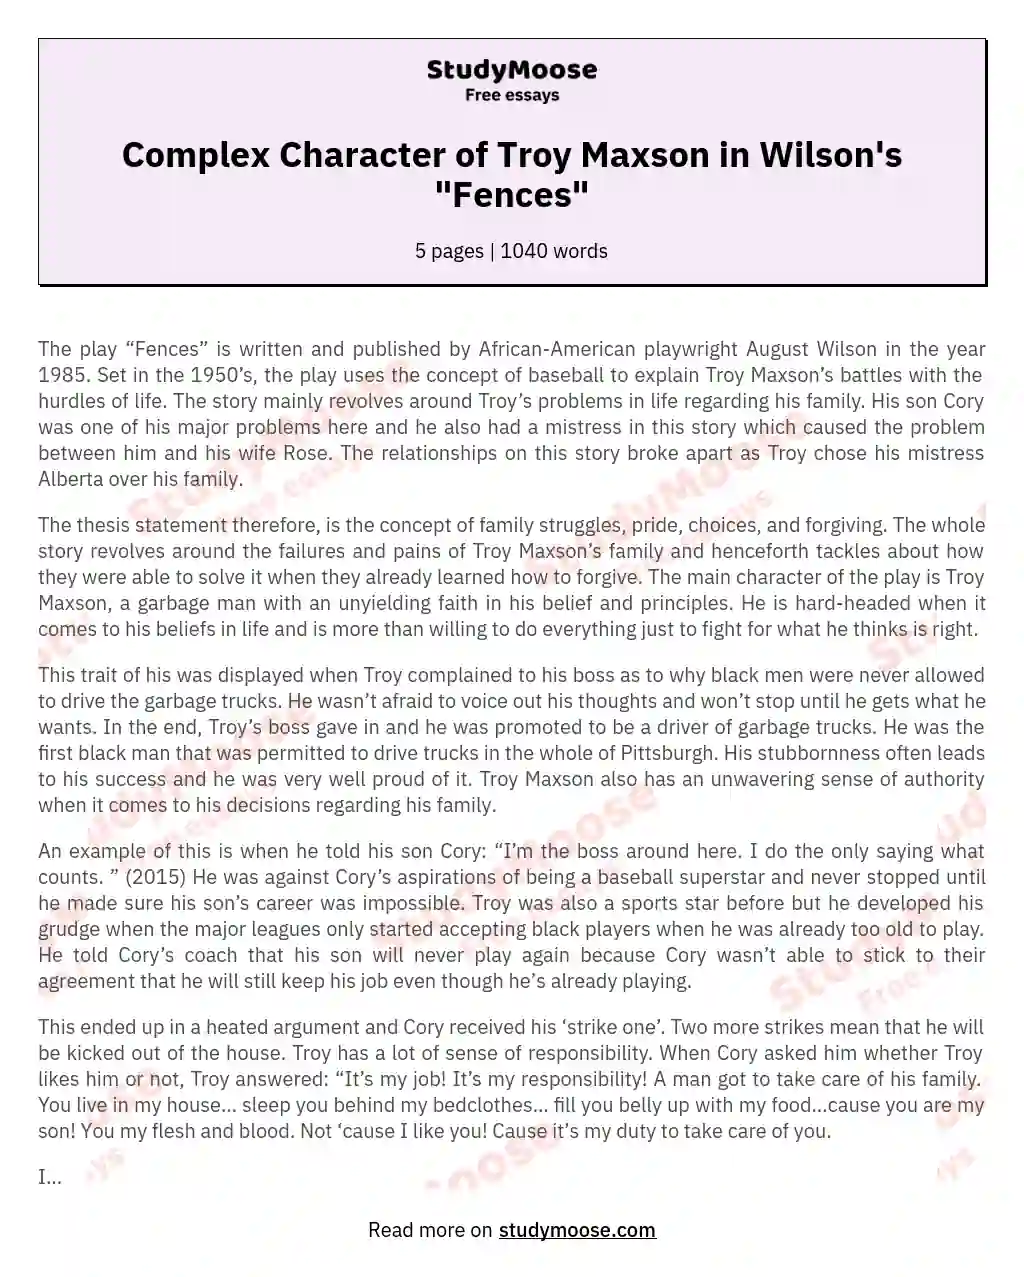 Complex Character of Troy Maxson in Wilson's "Fences" essay